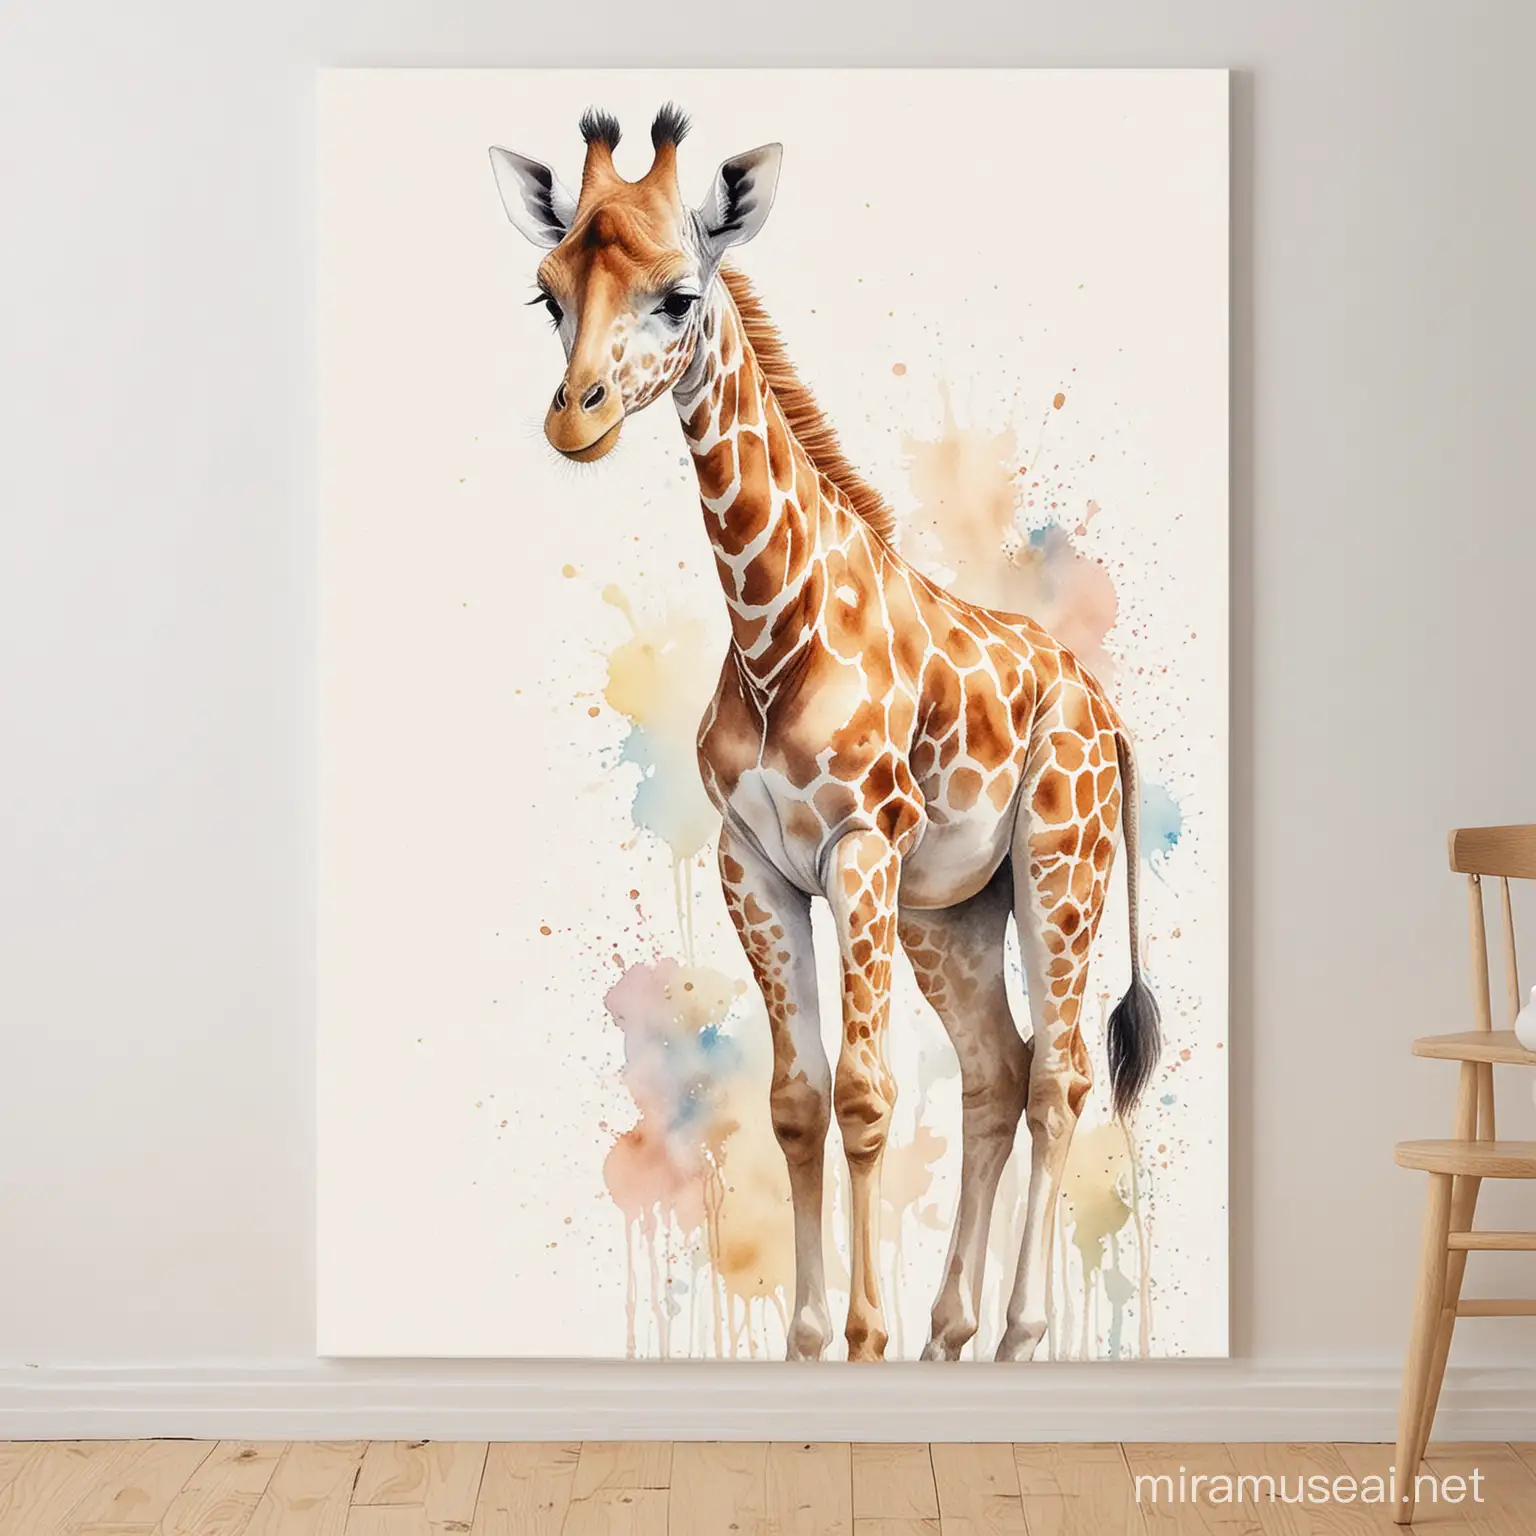 Create a charming watercolor painting of a baby giraffe against a serene white background, perfect for adorning a nursery room with its adorable presence. Capture the innocence and sweetness of the giraffe calf as it stands tall amidst its natural grace, evoking feelings of warmth and joy. Let the delicate strokes and soft hues of watercolor bring this enchanting scene to life, infusing the room with a sense of tranquility and wonder.